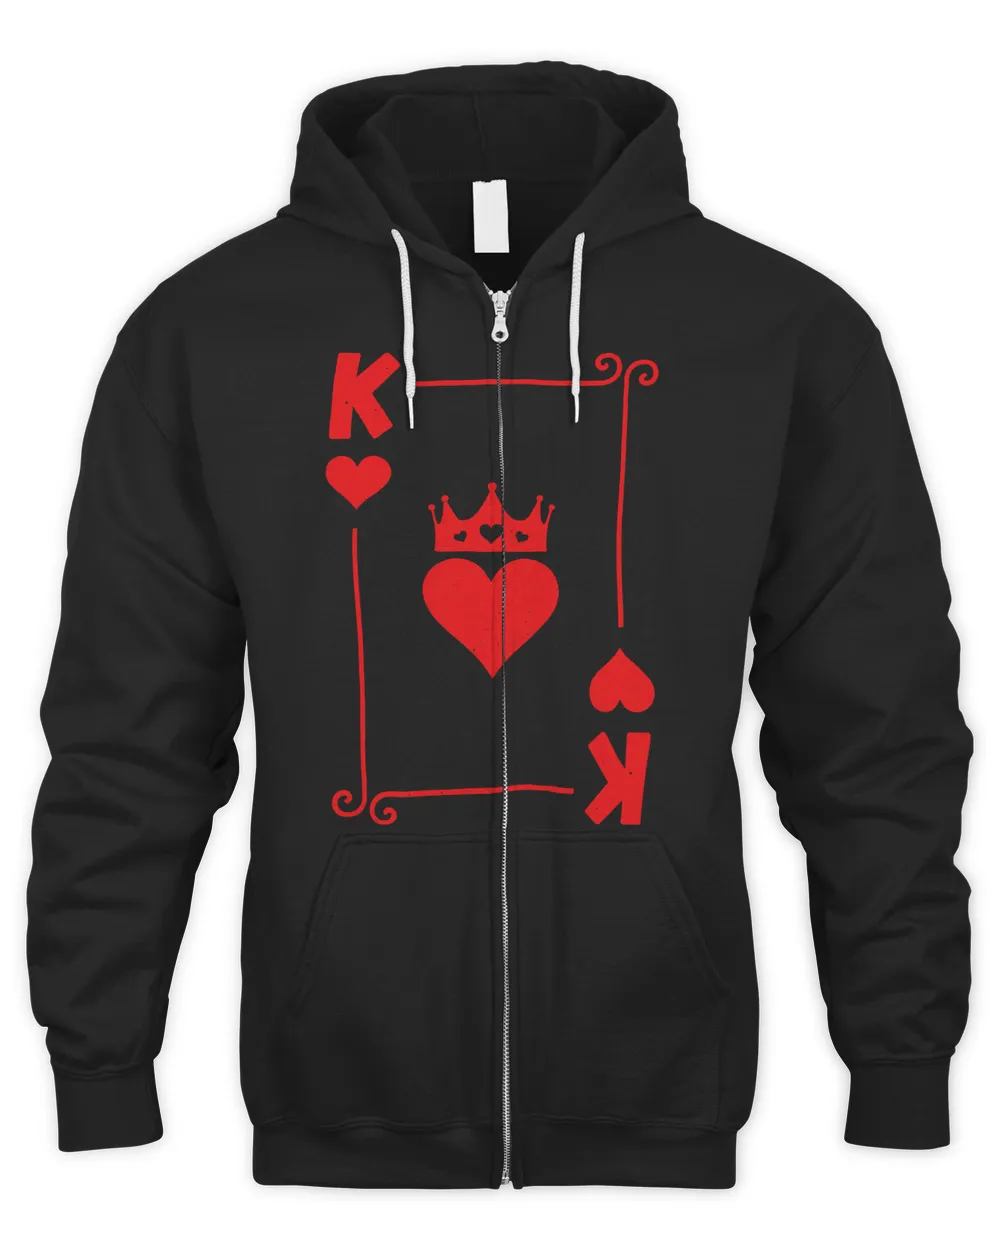 King & Queen - Matching Couple Costume - King of Hearts T-Shirt